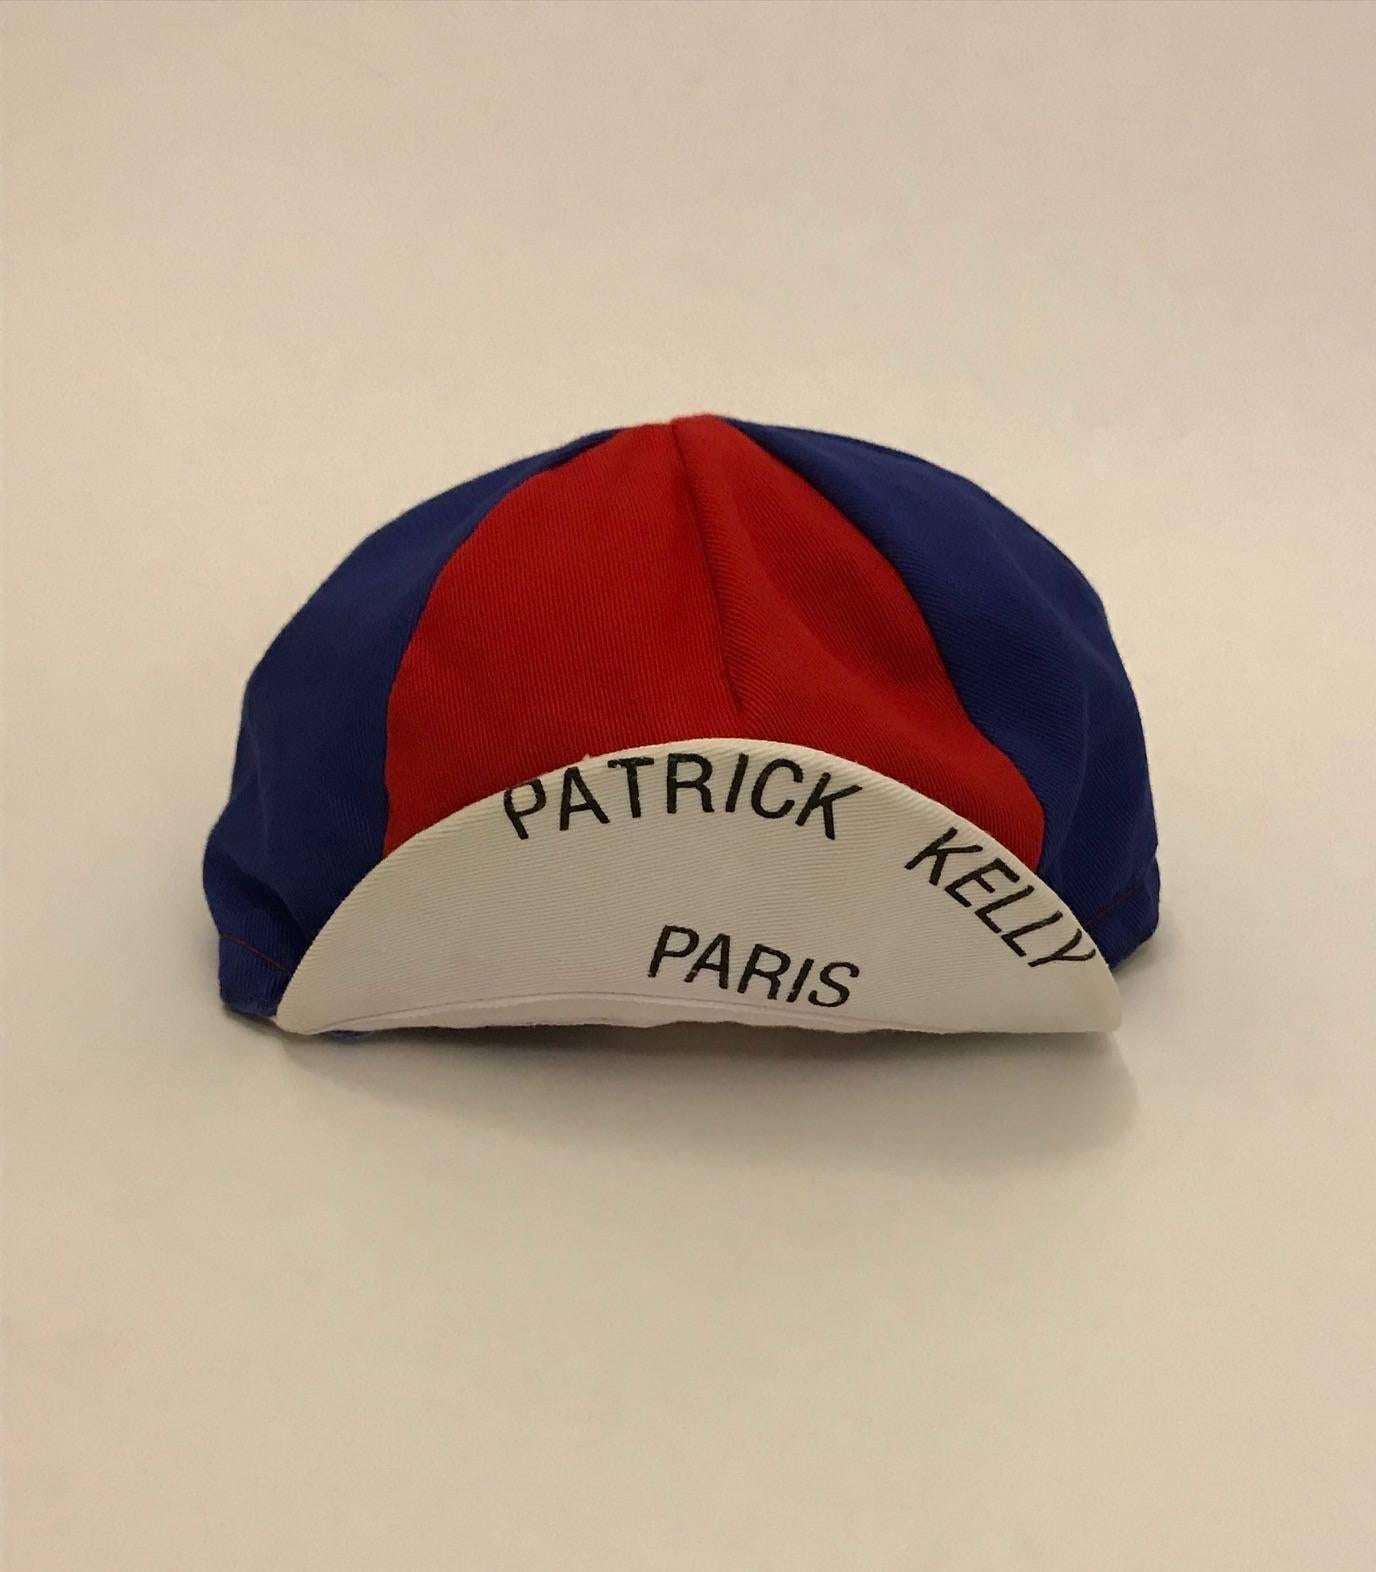 Extremely rare Patrick Kelly 1980's blue, red and white soft elastic back baseball cap with Patrick Kelly Paris printed at the under brim. These iconic 'Paris' printed hats were a piece of Patrick's signature style-- you rarely caught him without